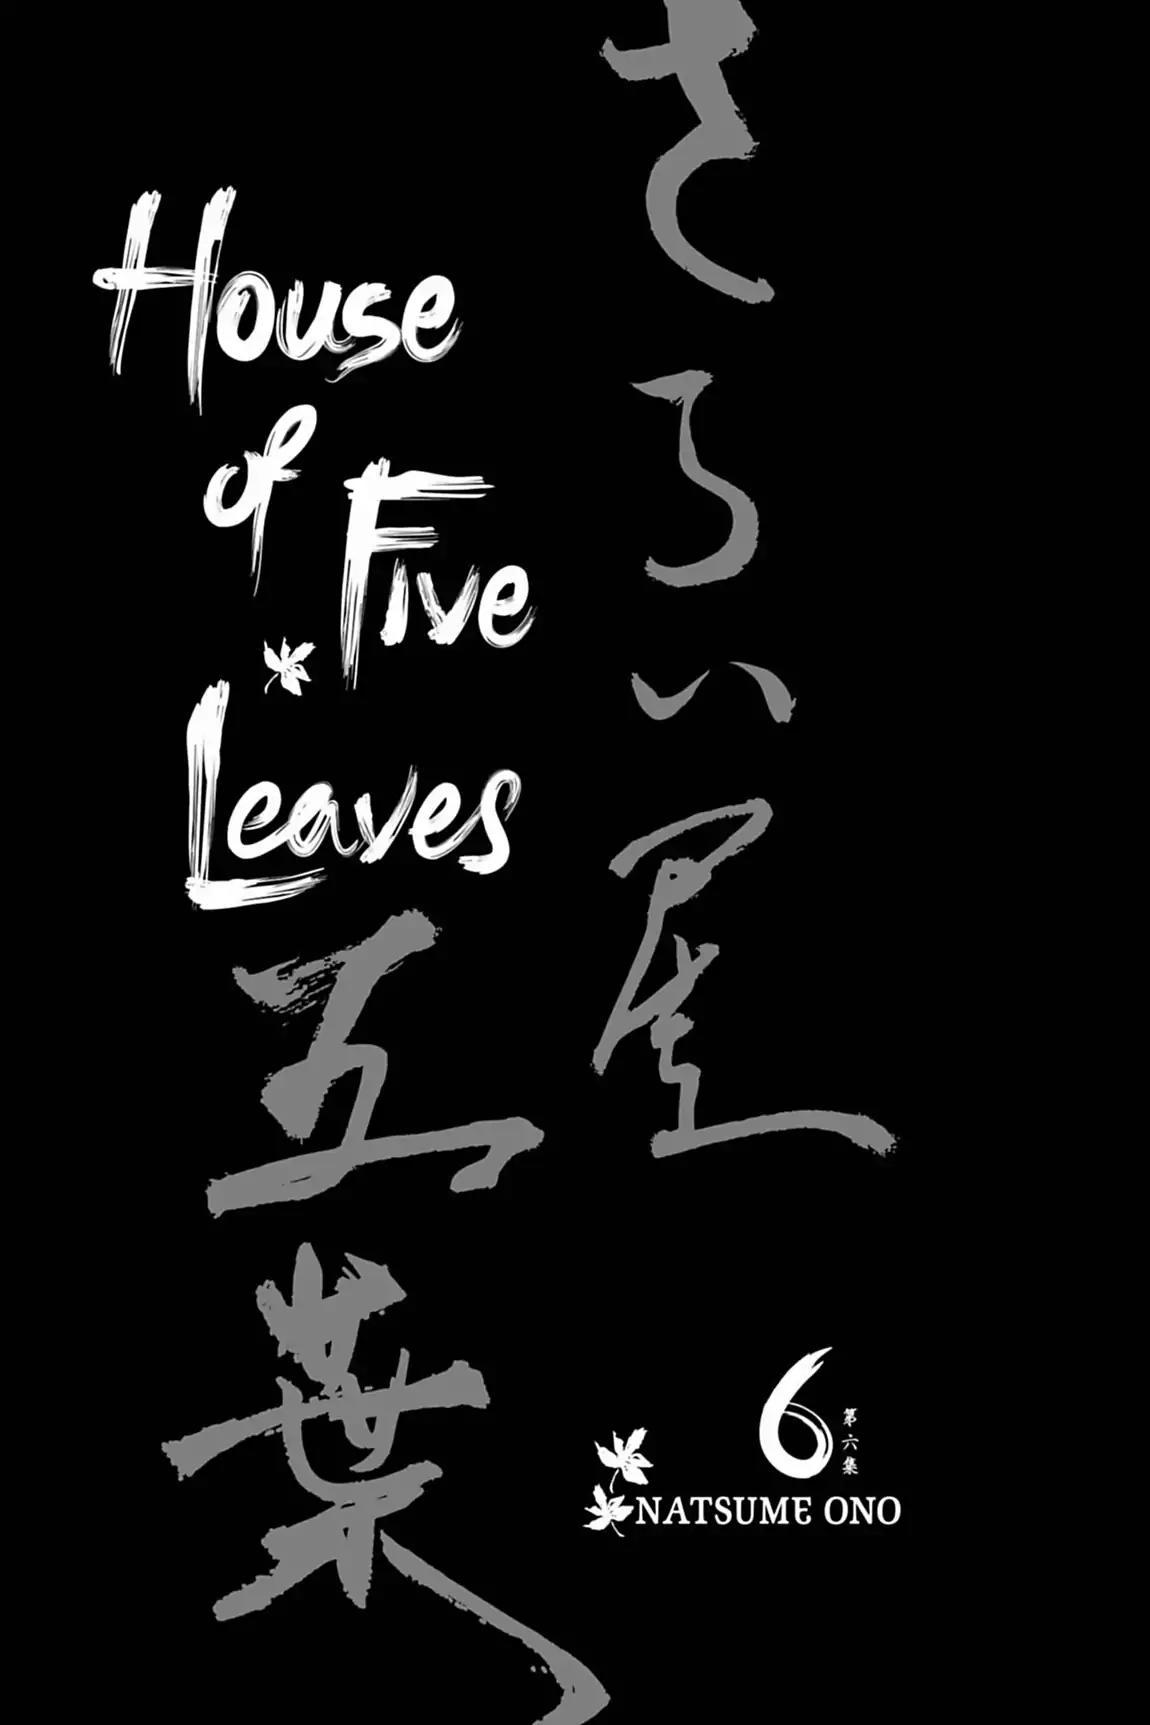 House of Five Leaves - episode 42 - 3